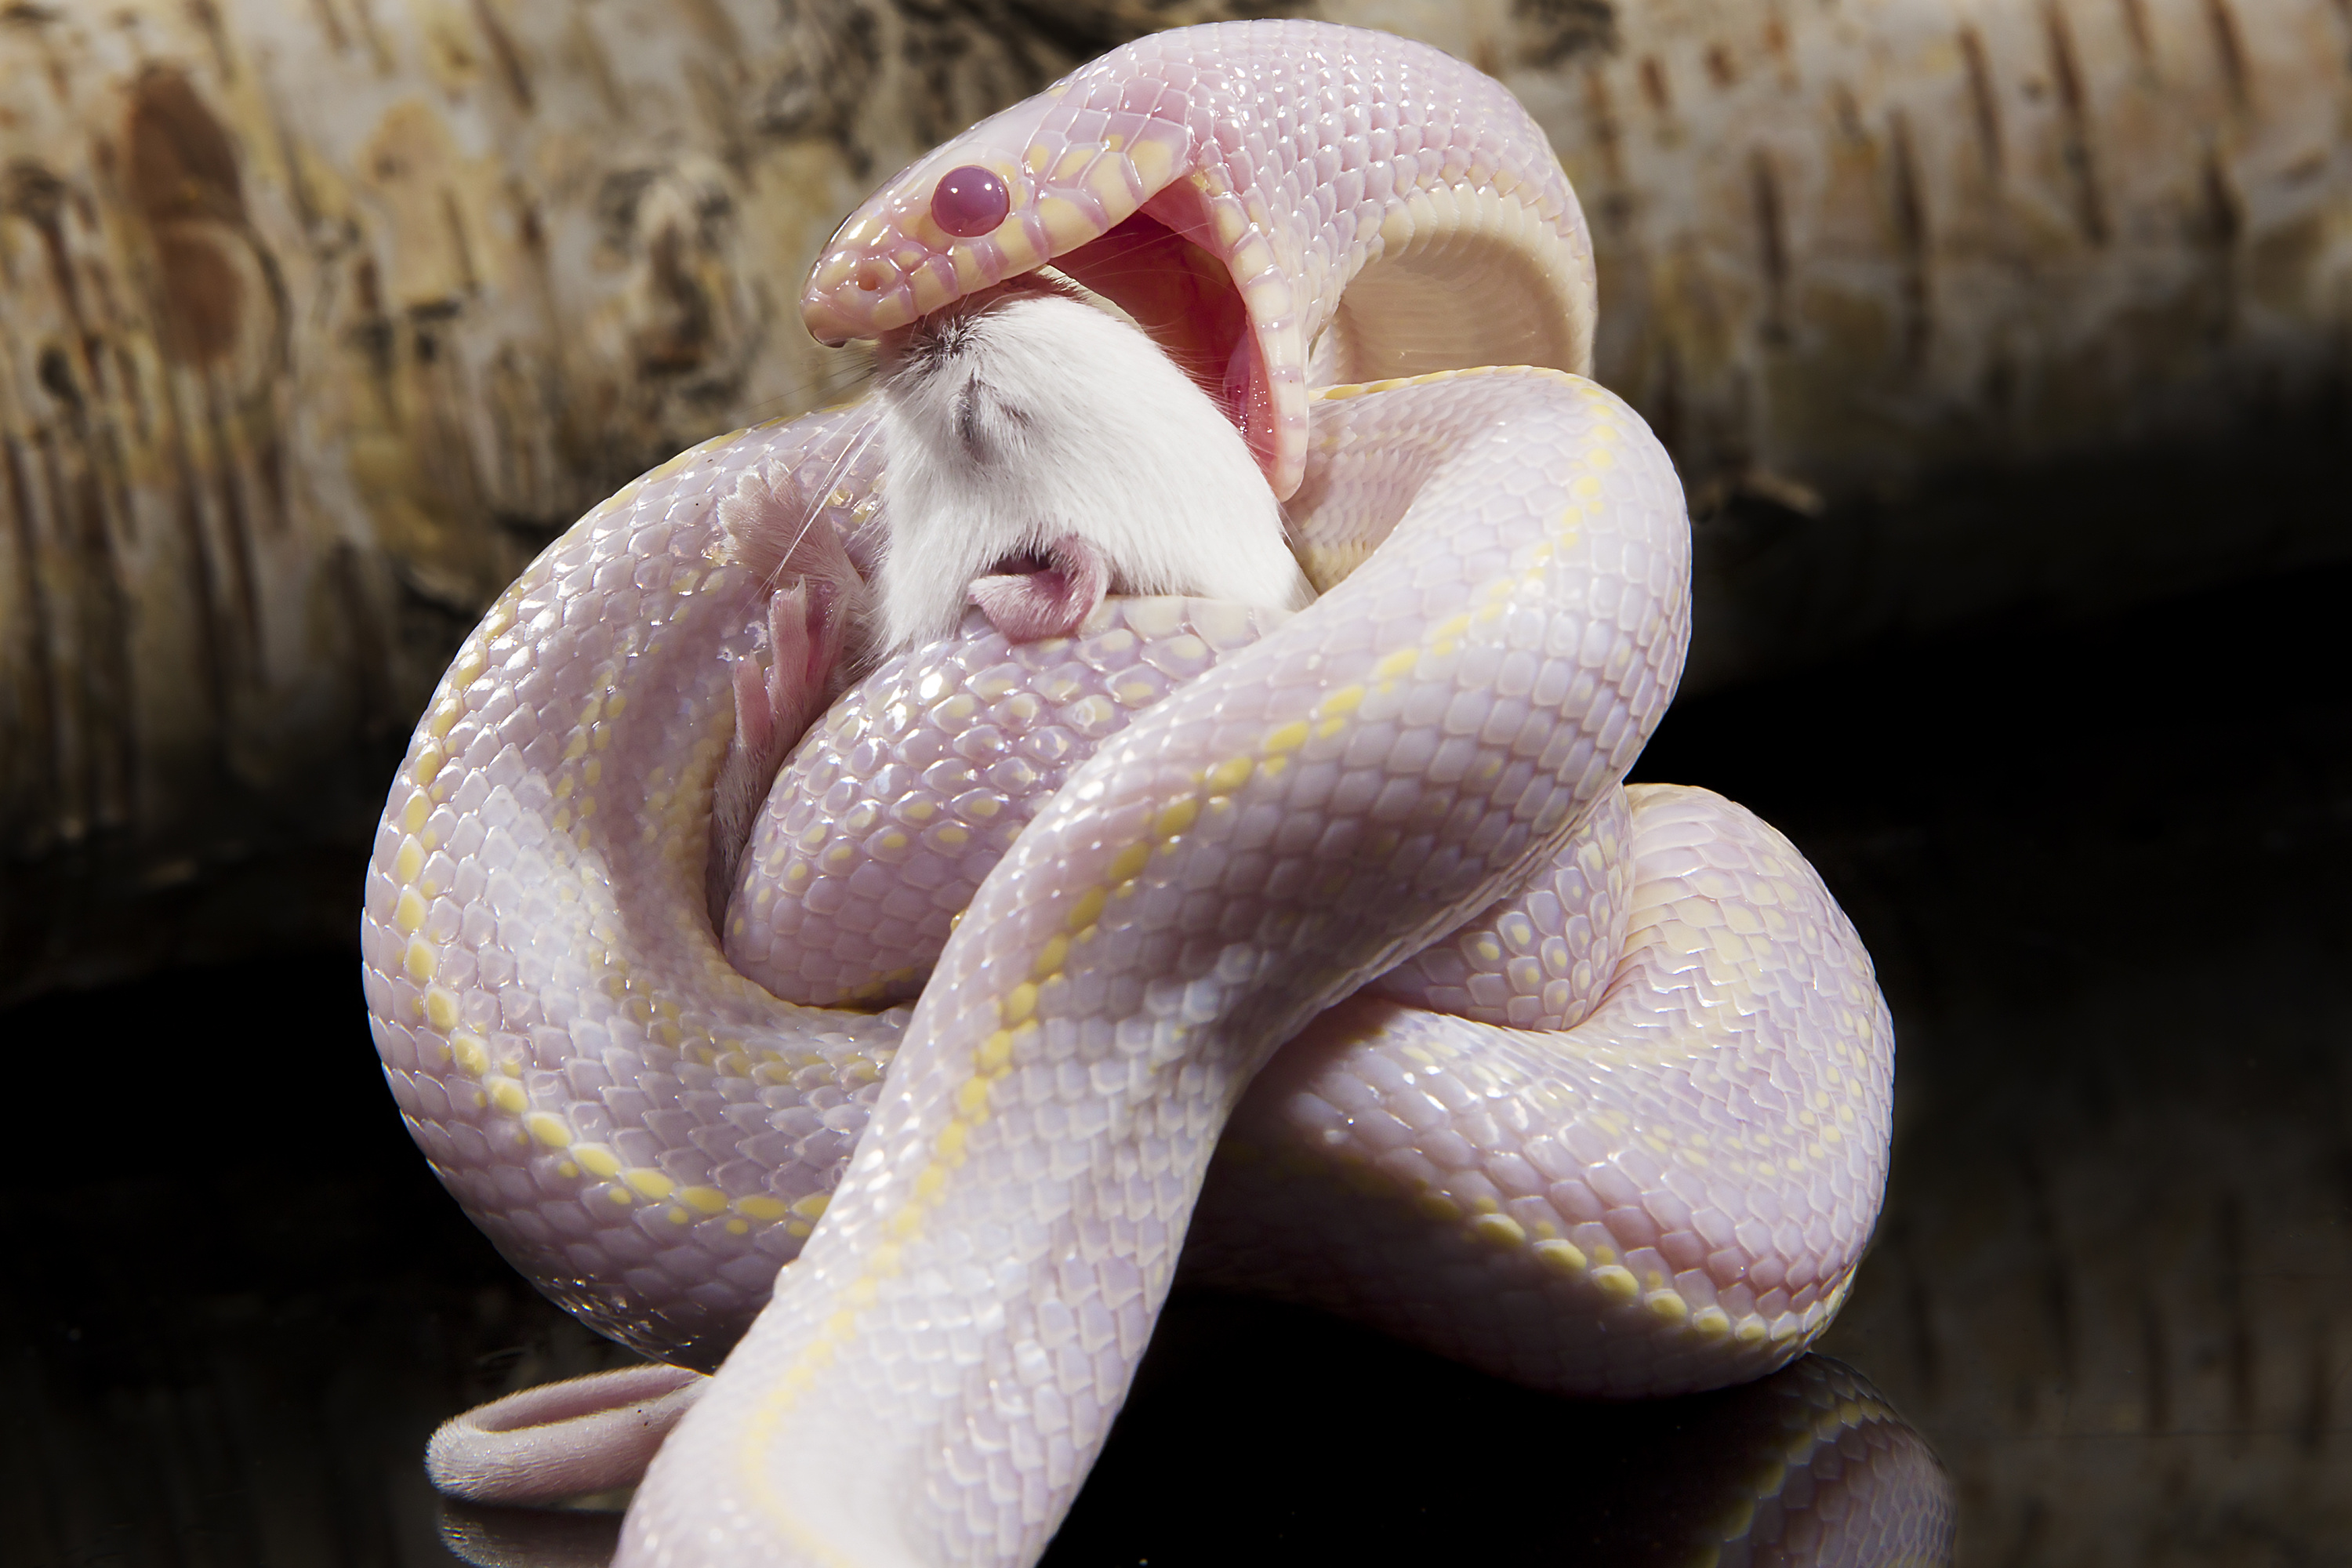 15 of the World’s Most Incredible Snake Facts - IMP WORLD